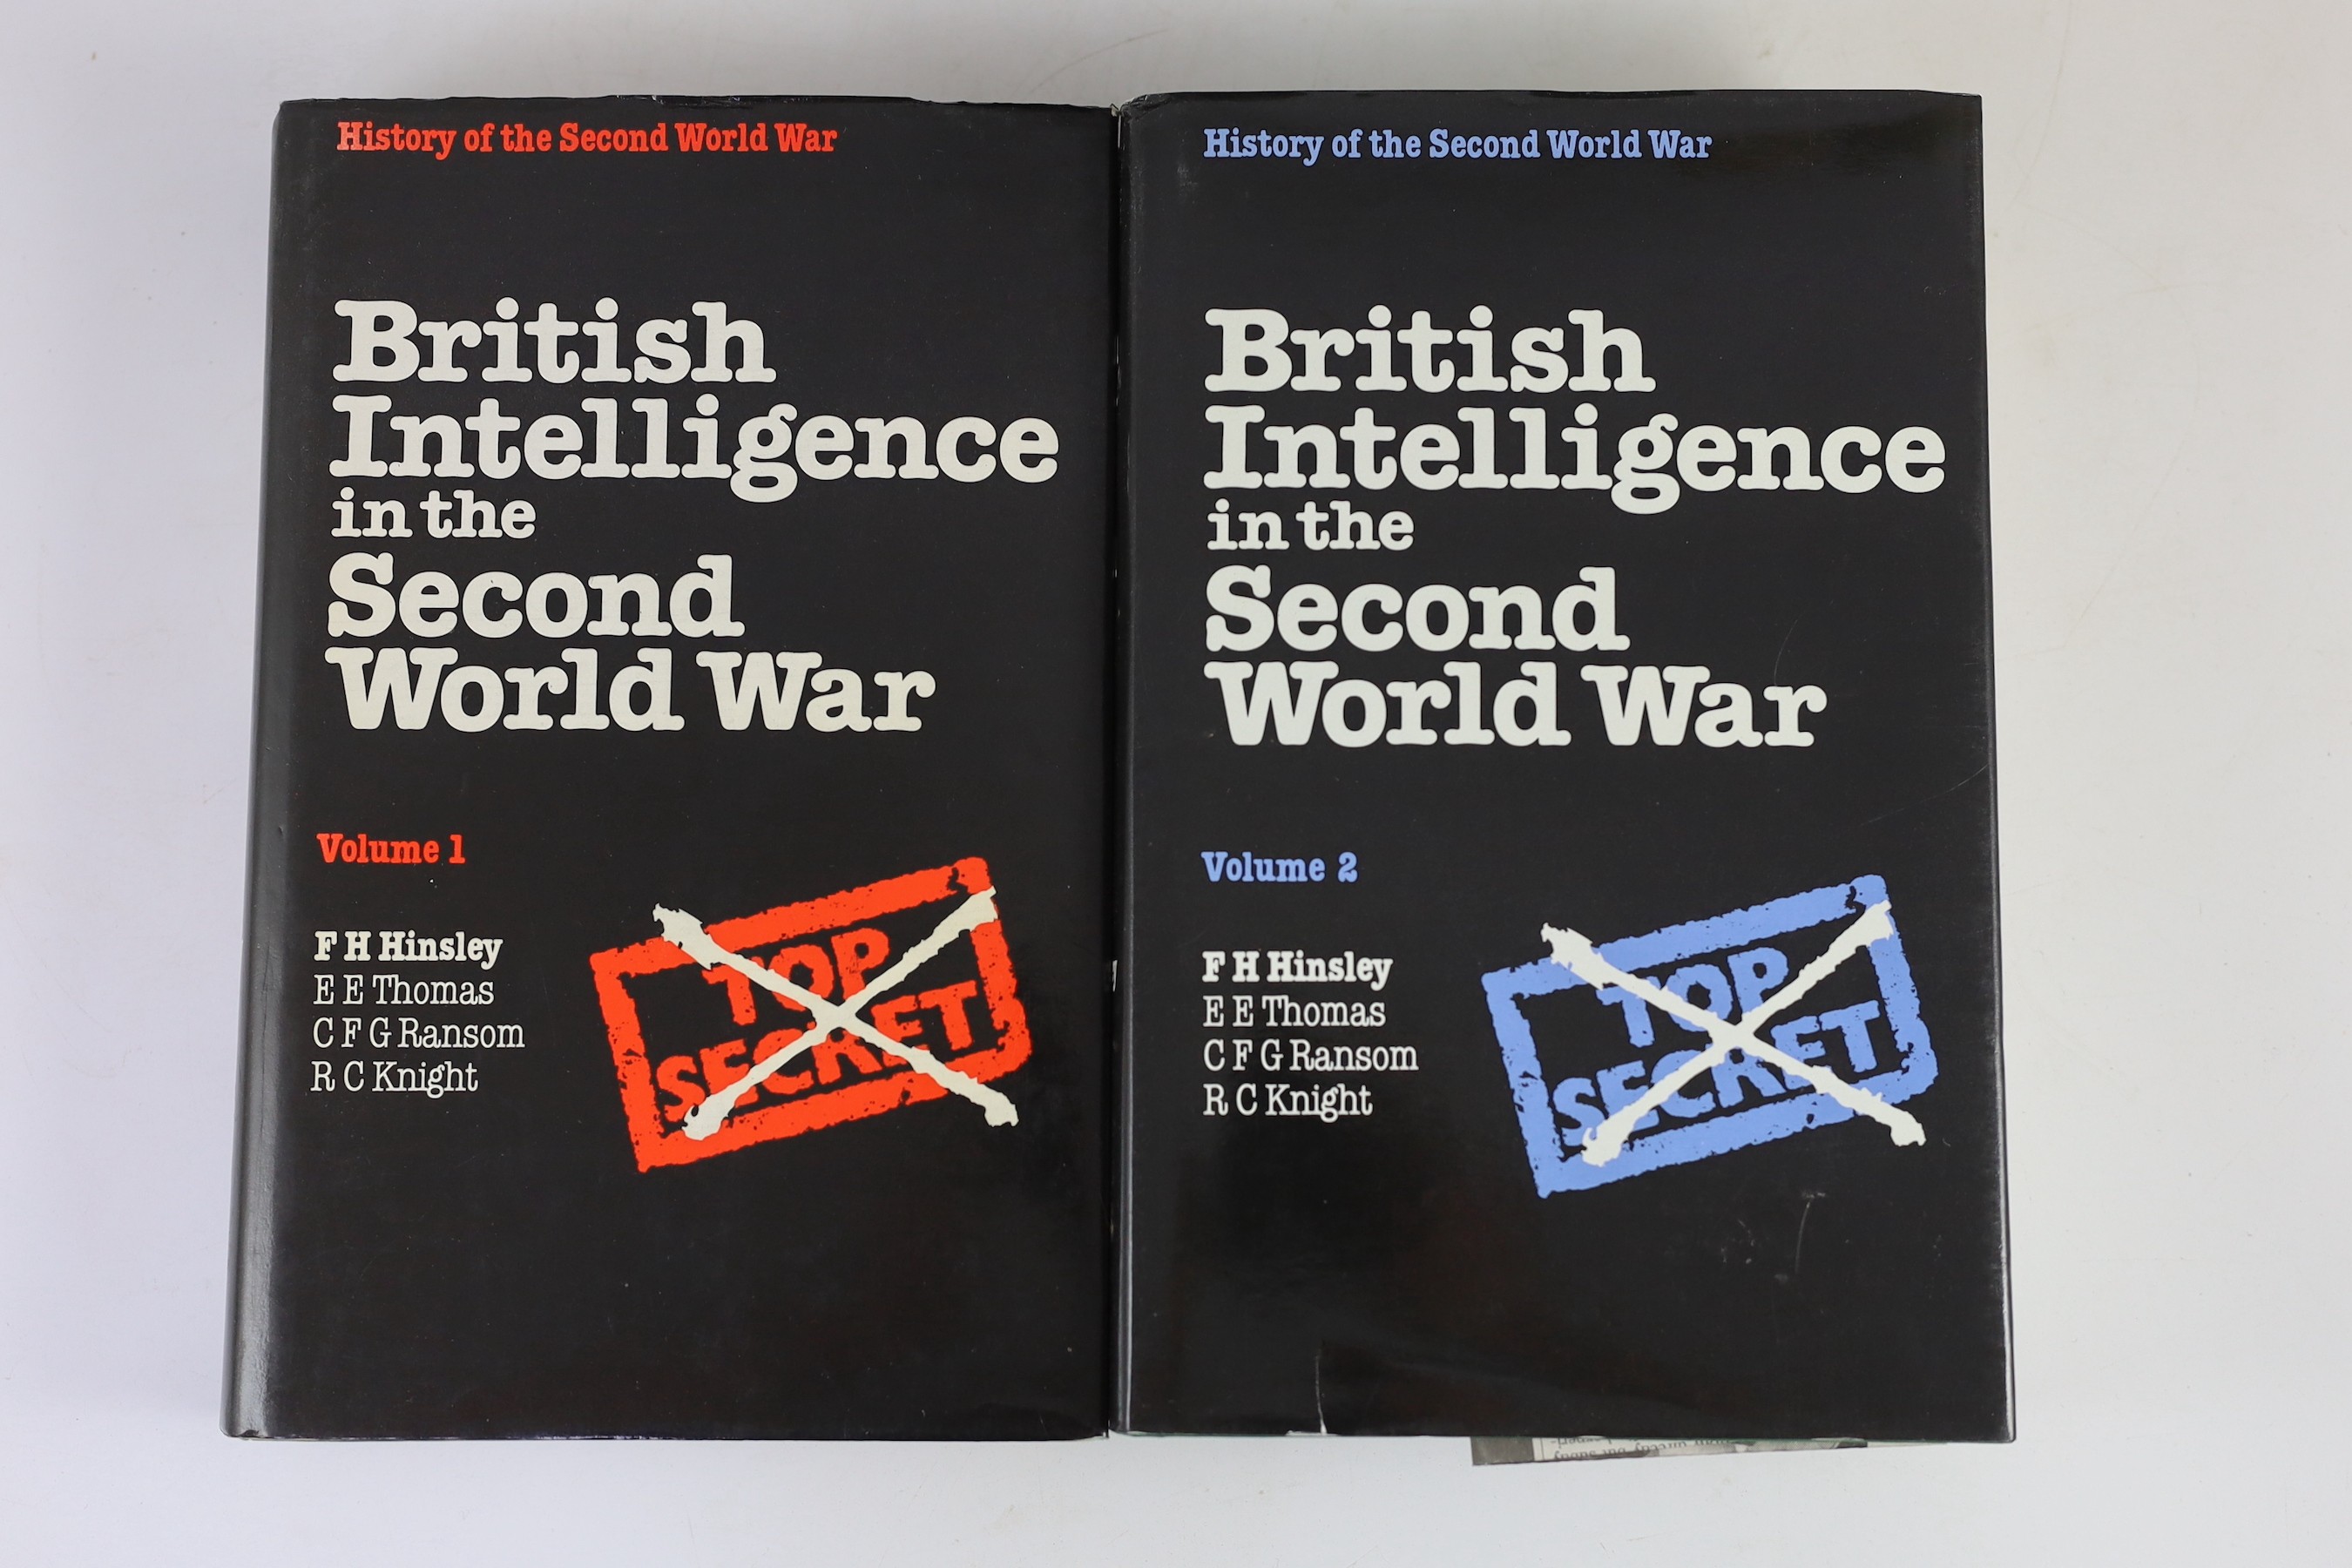 Woodburn Kirby, S (Maj.-Gen.) et al - The War Against Japan, 1st editions, 5 vols, 8vo, cloth, vols 3-5 with d/j’s, HMSO, 1957-69 and Hinsley, F.H et al - Official History of the Second World War. British Intelligence in